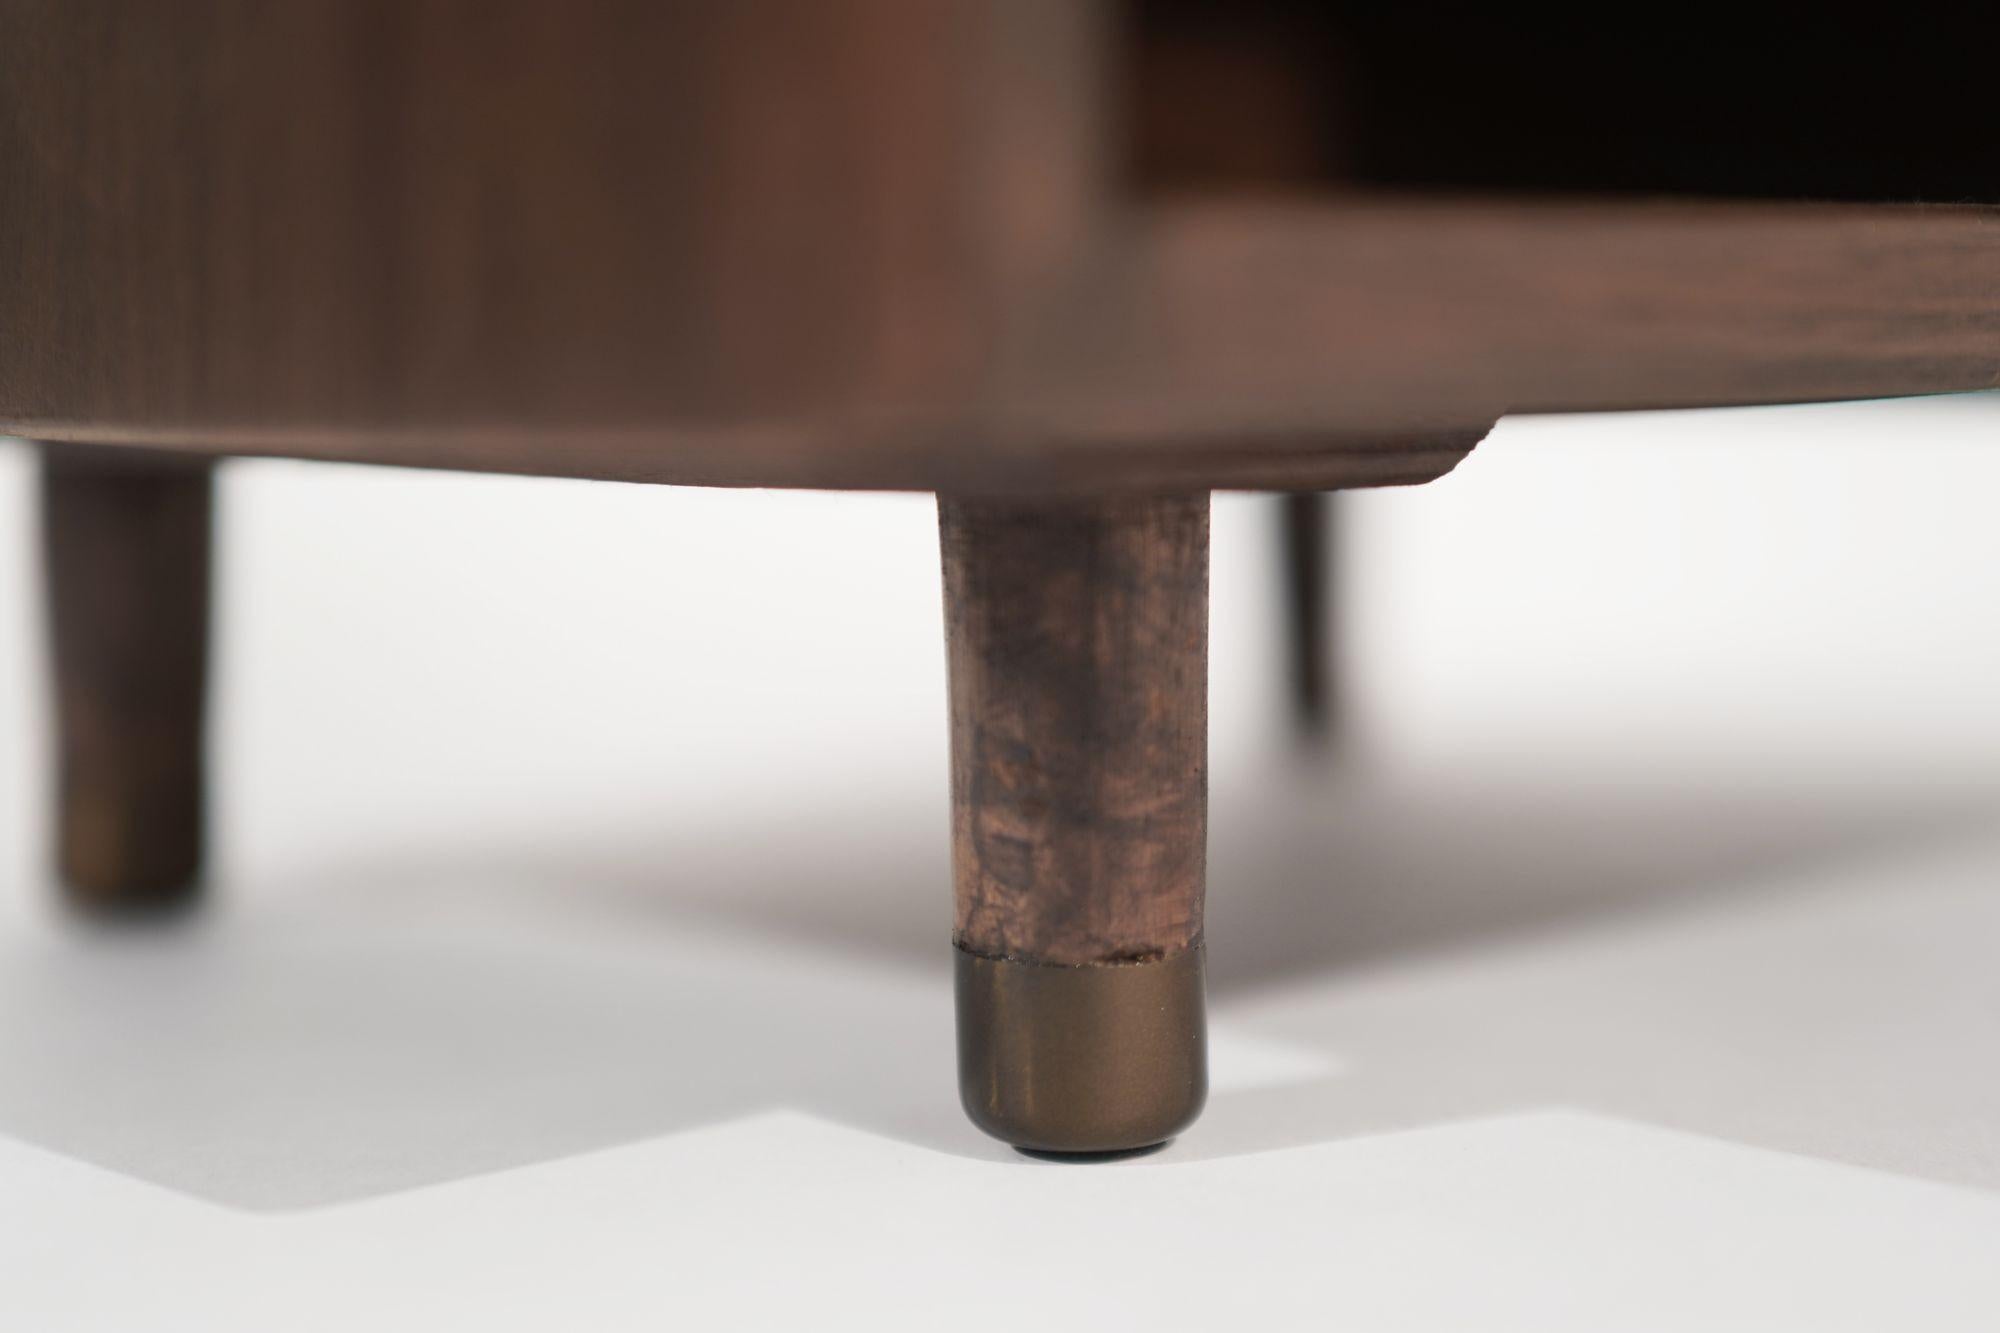 Set of Minimalist Walnut End Tables, C. 1950s For Sale 4